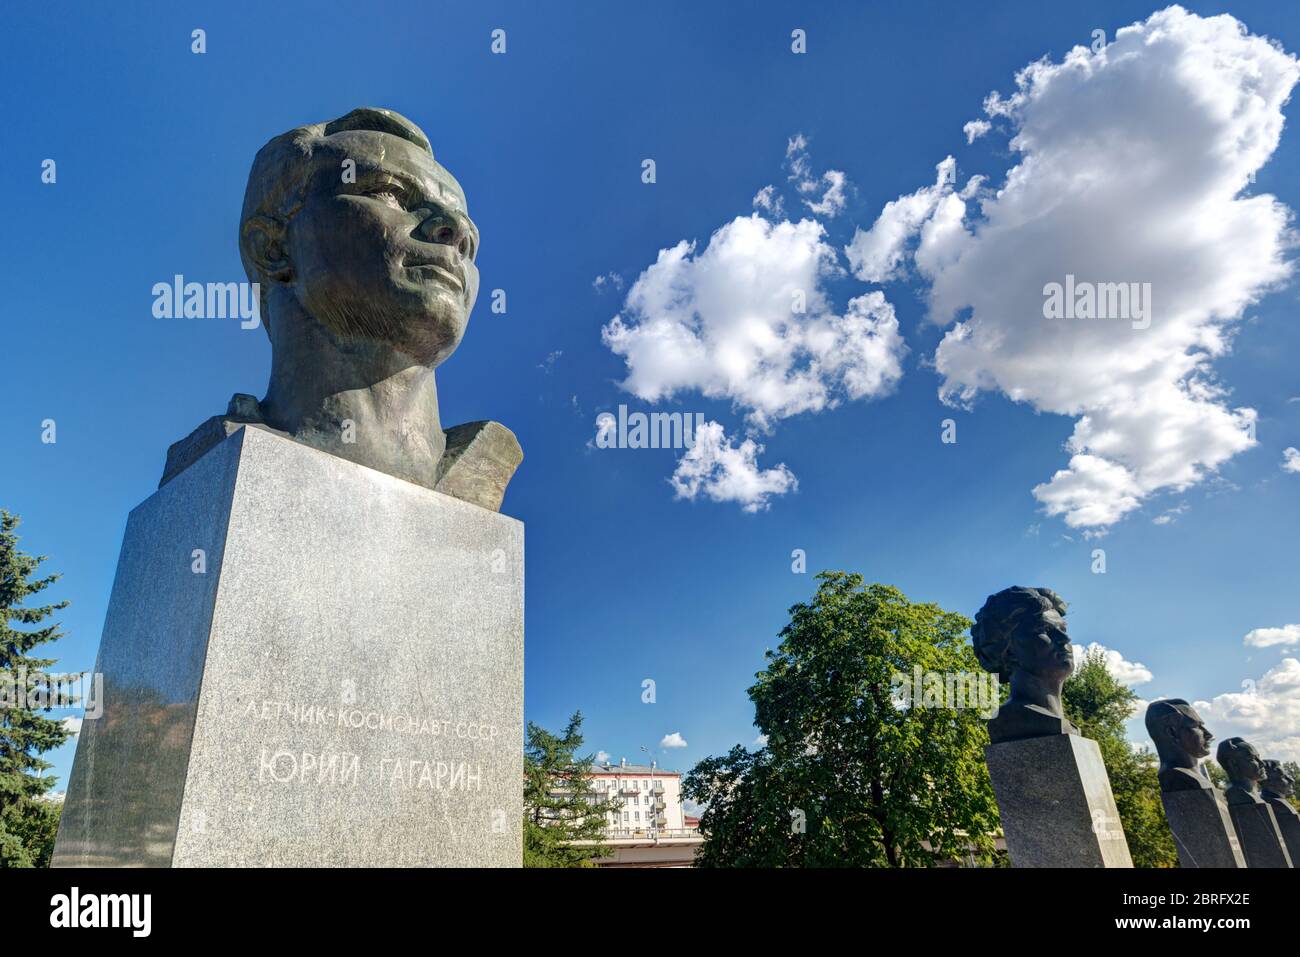 Monuments to Yuri Gagarin (foreground) and other russian astronauts on the Cosmonauts Alley in Moscow Stock Photo